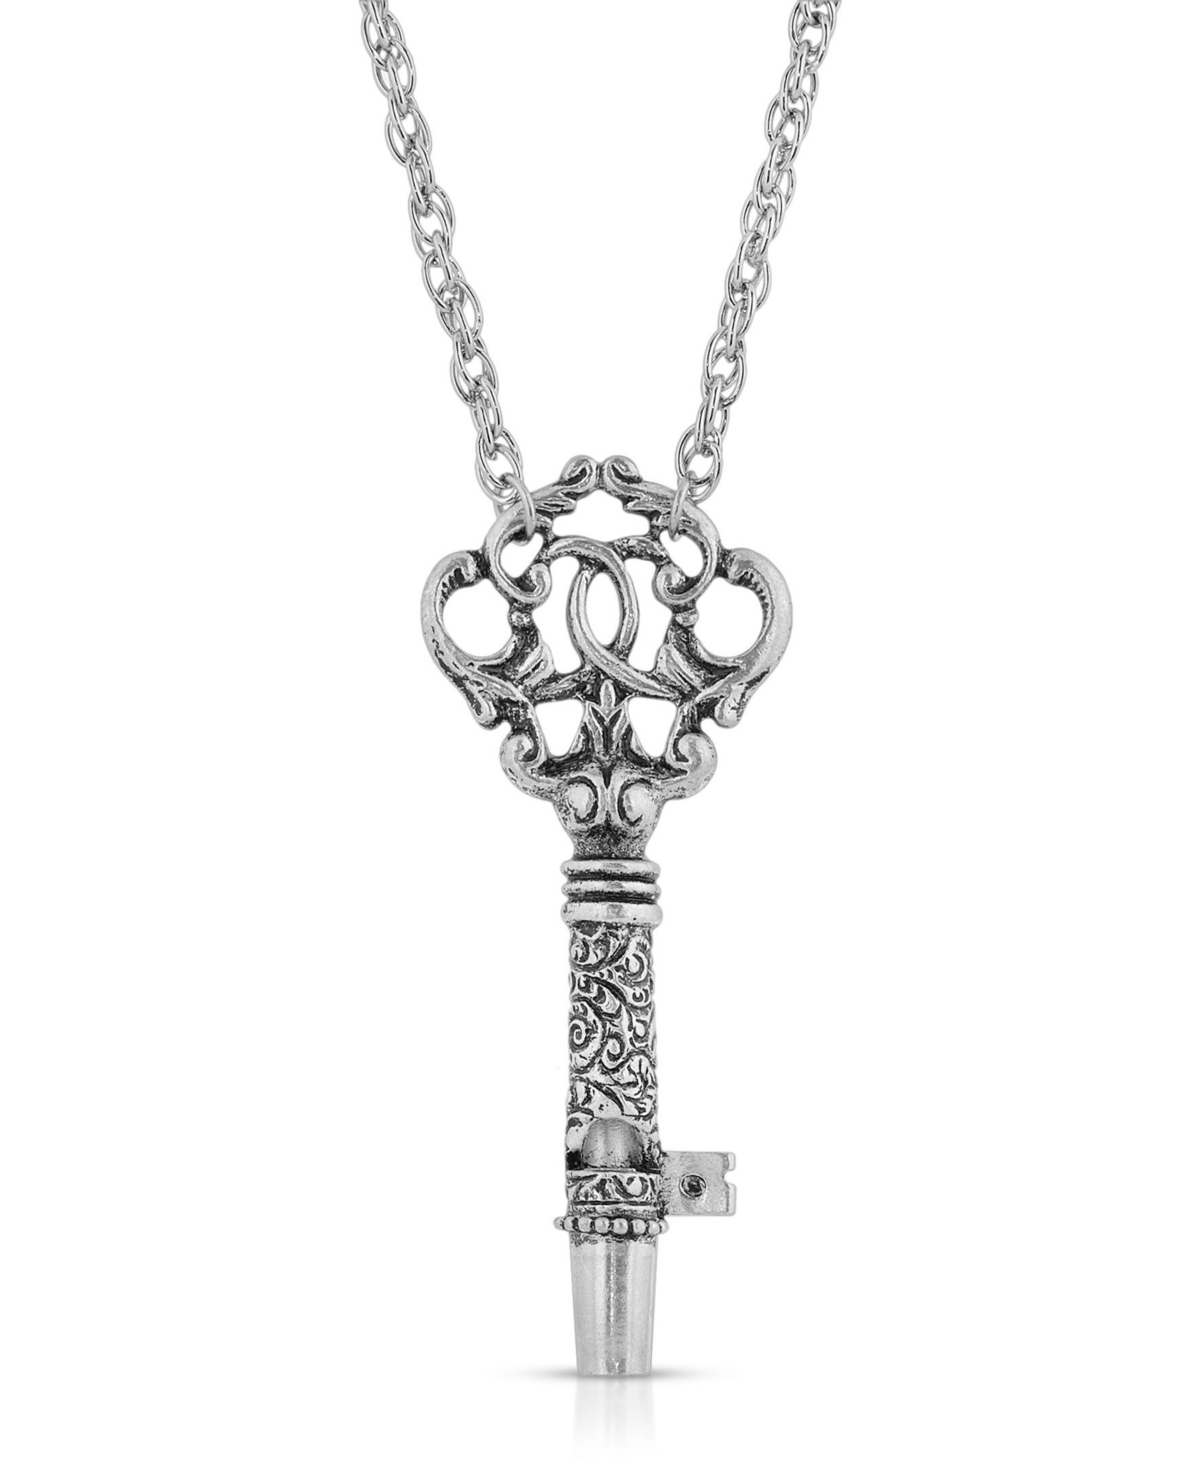 2028 Antique-like Pewter Key Whistle Pendant Necklace In Silver